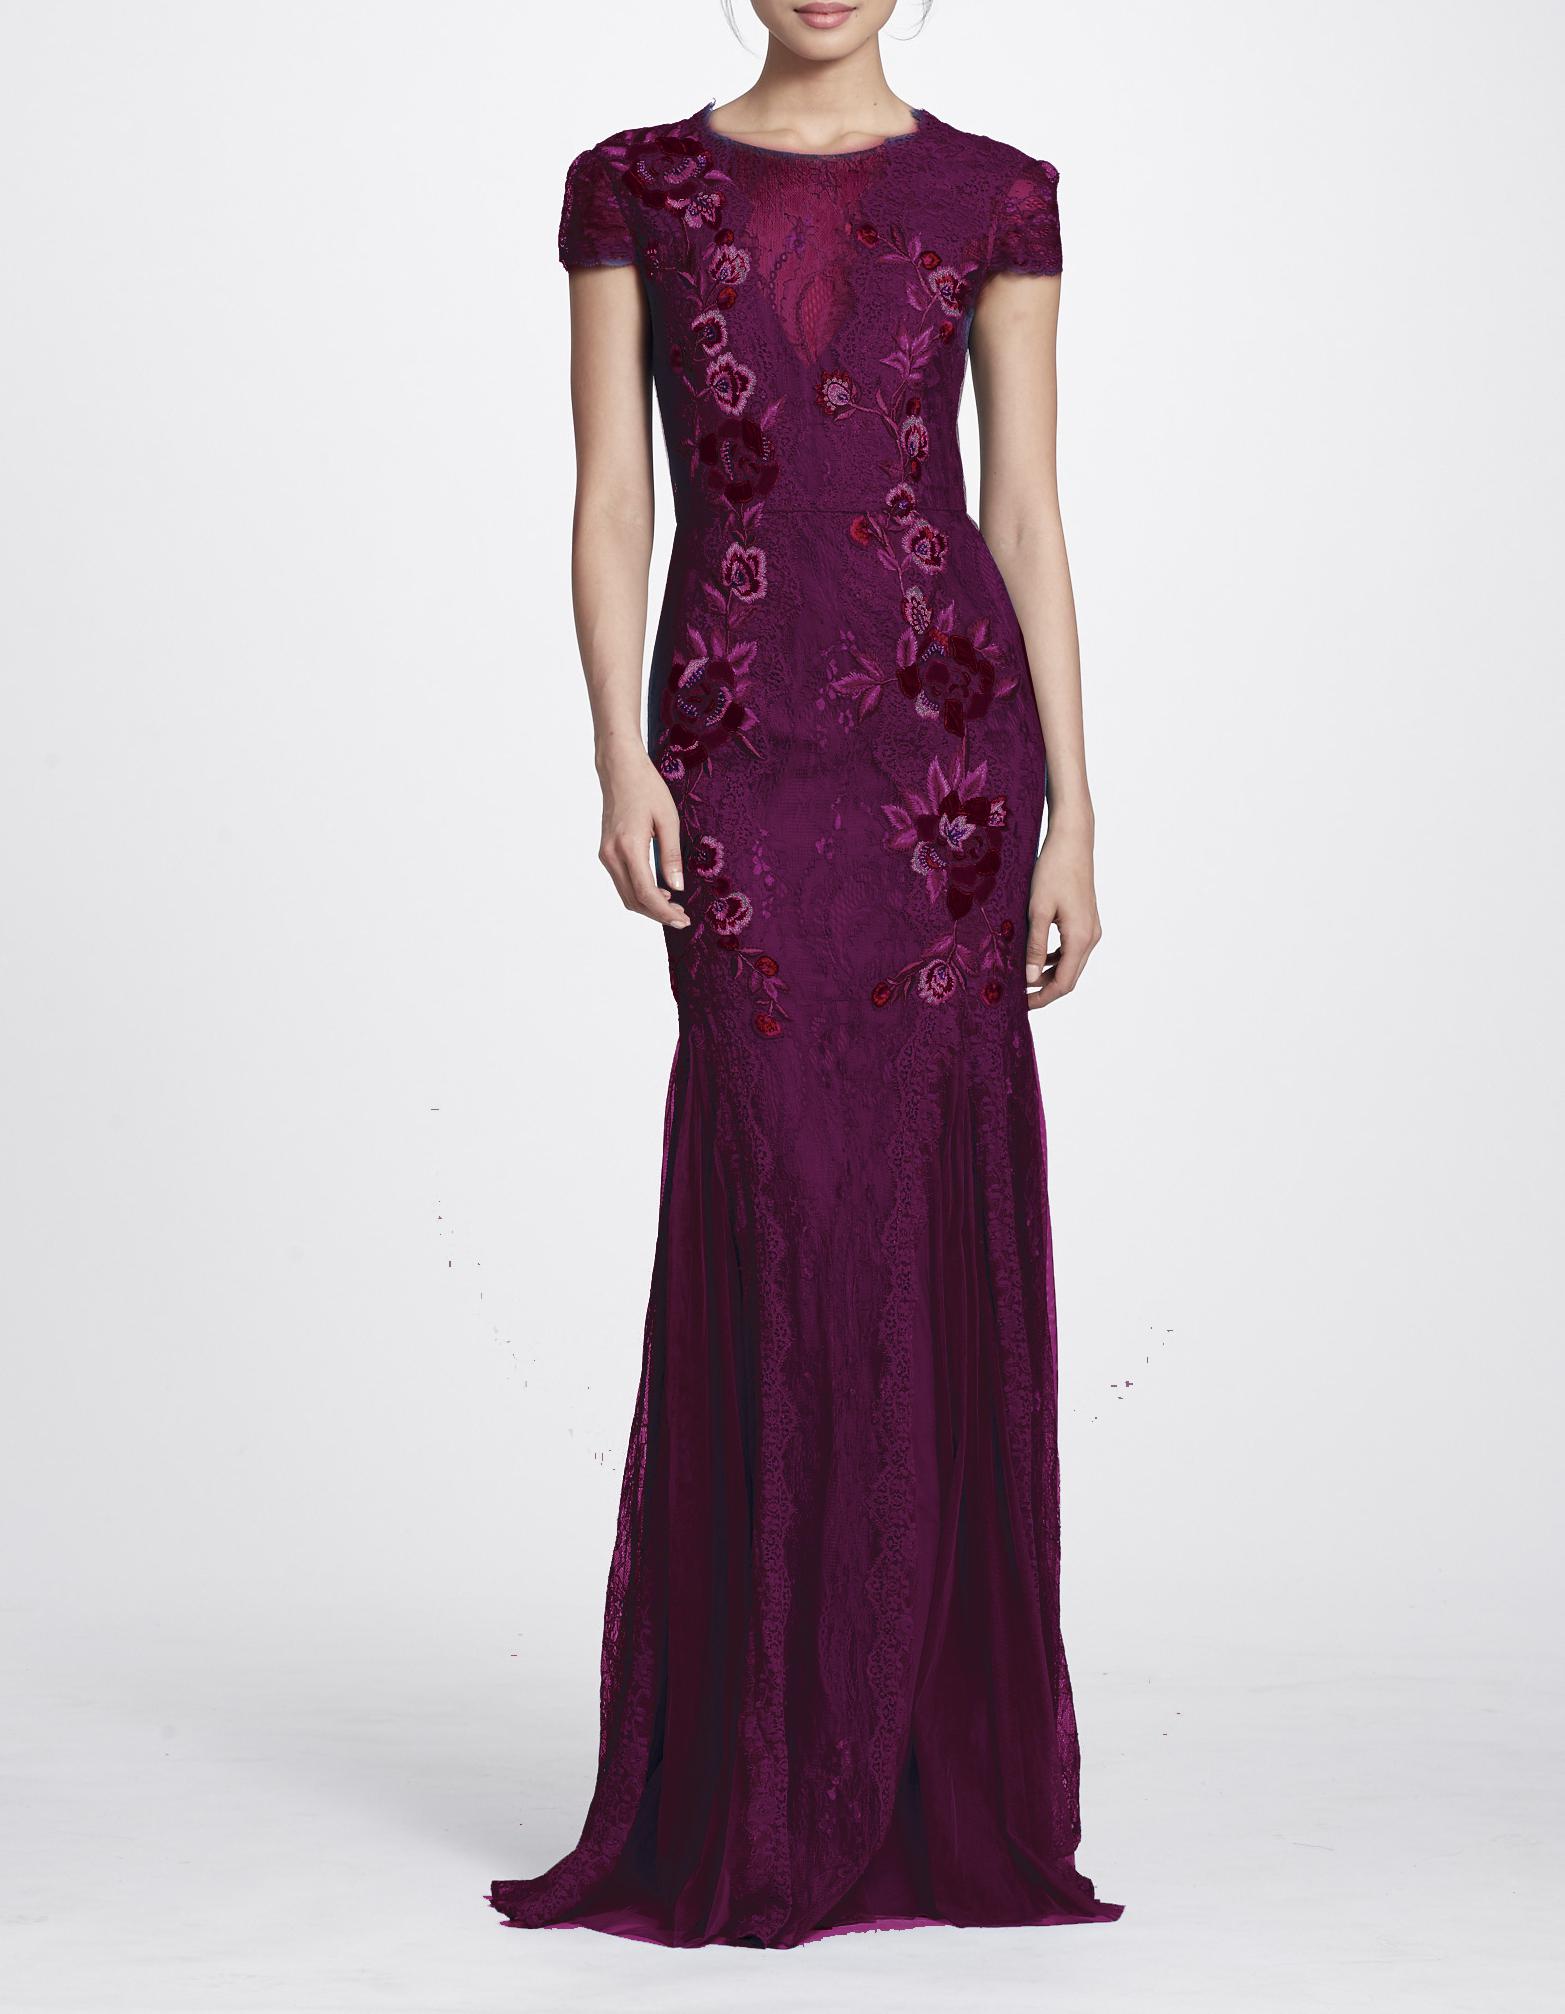 Lyst - Marchesa notte Short Sleeve Floral Embroidered Gown in Purple